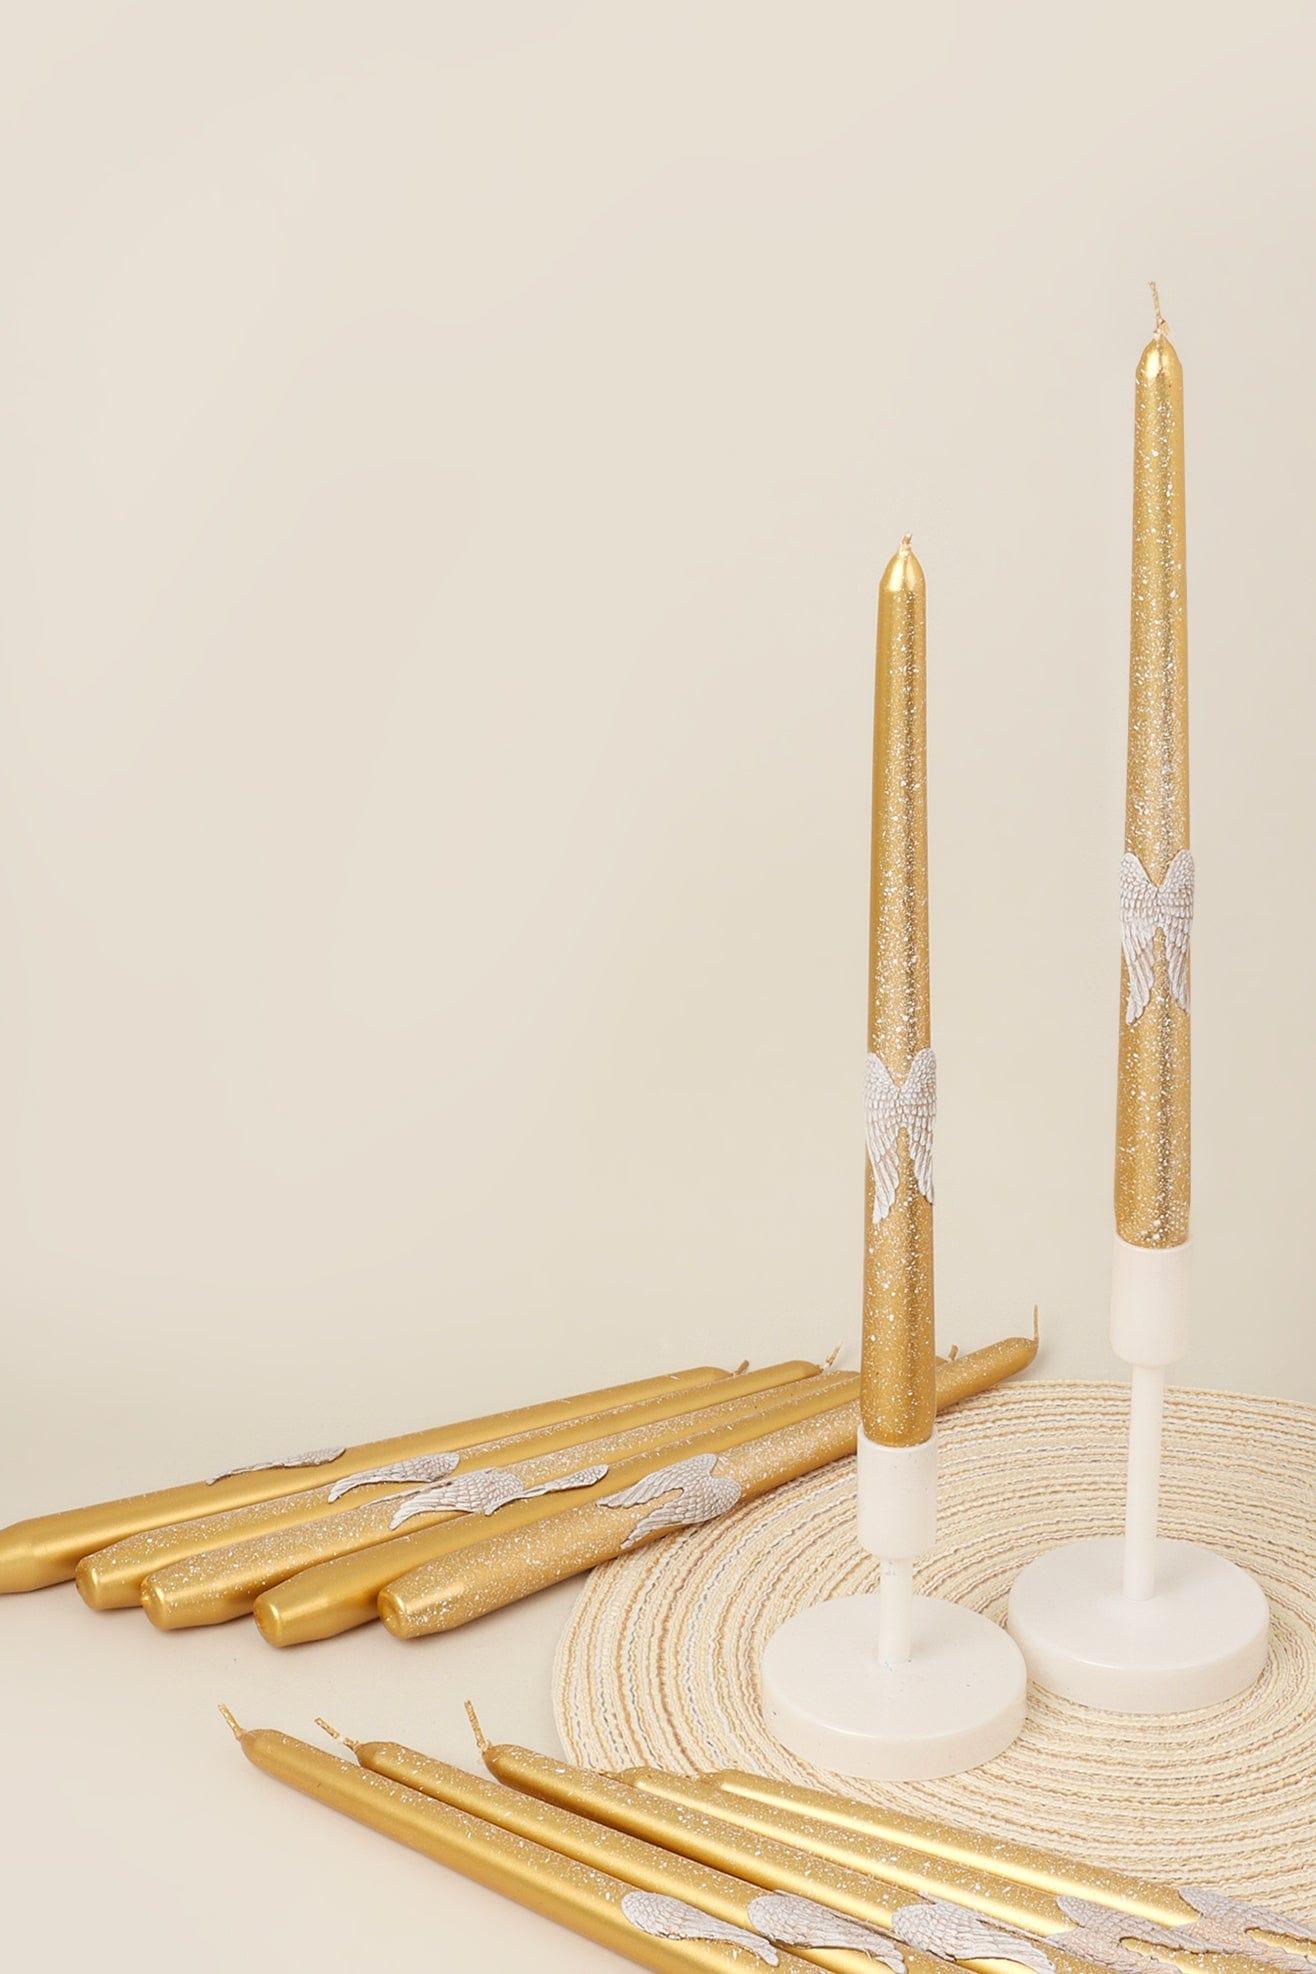 G Decor Candles & Candle Holders Gold Pack of 12 Gold Dinner Candles with Angel Wing Designs